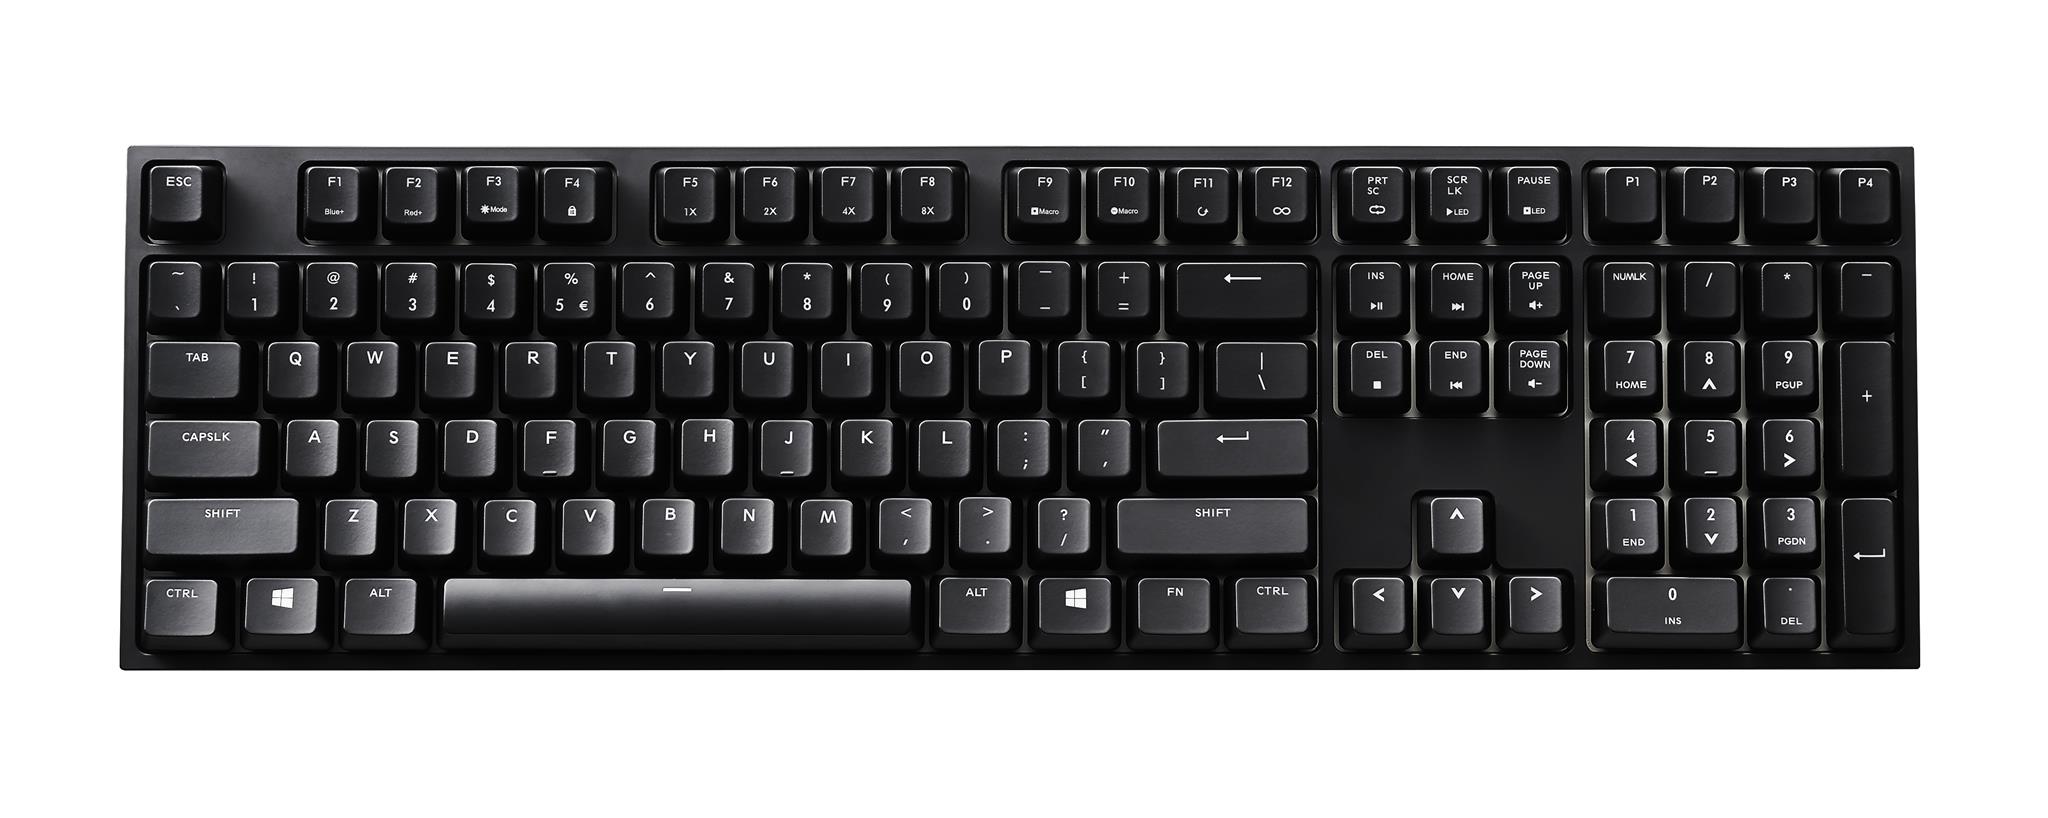 Cooler Master Quickfire XTI Mechnical Gaming Keyboard7